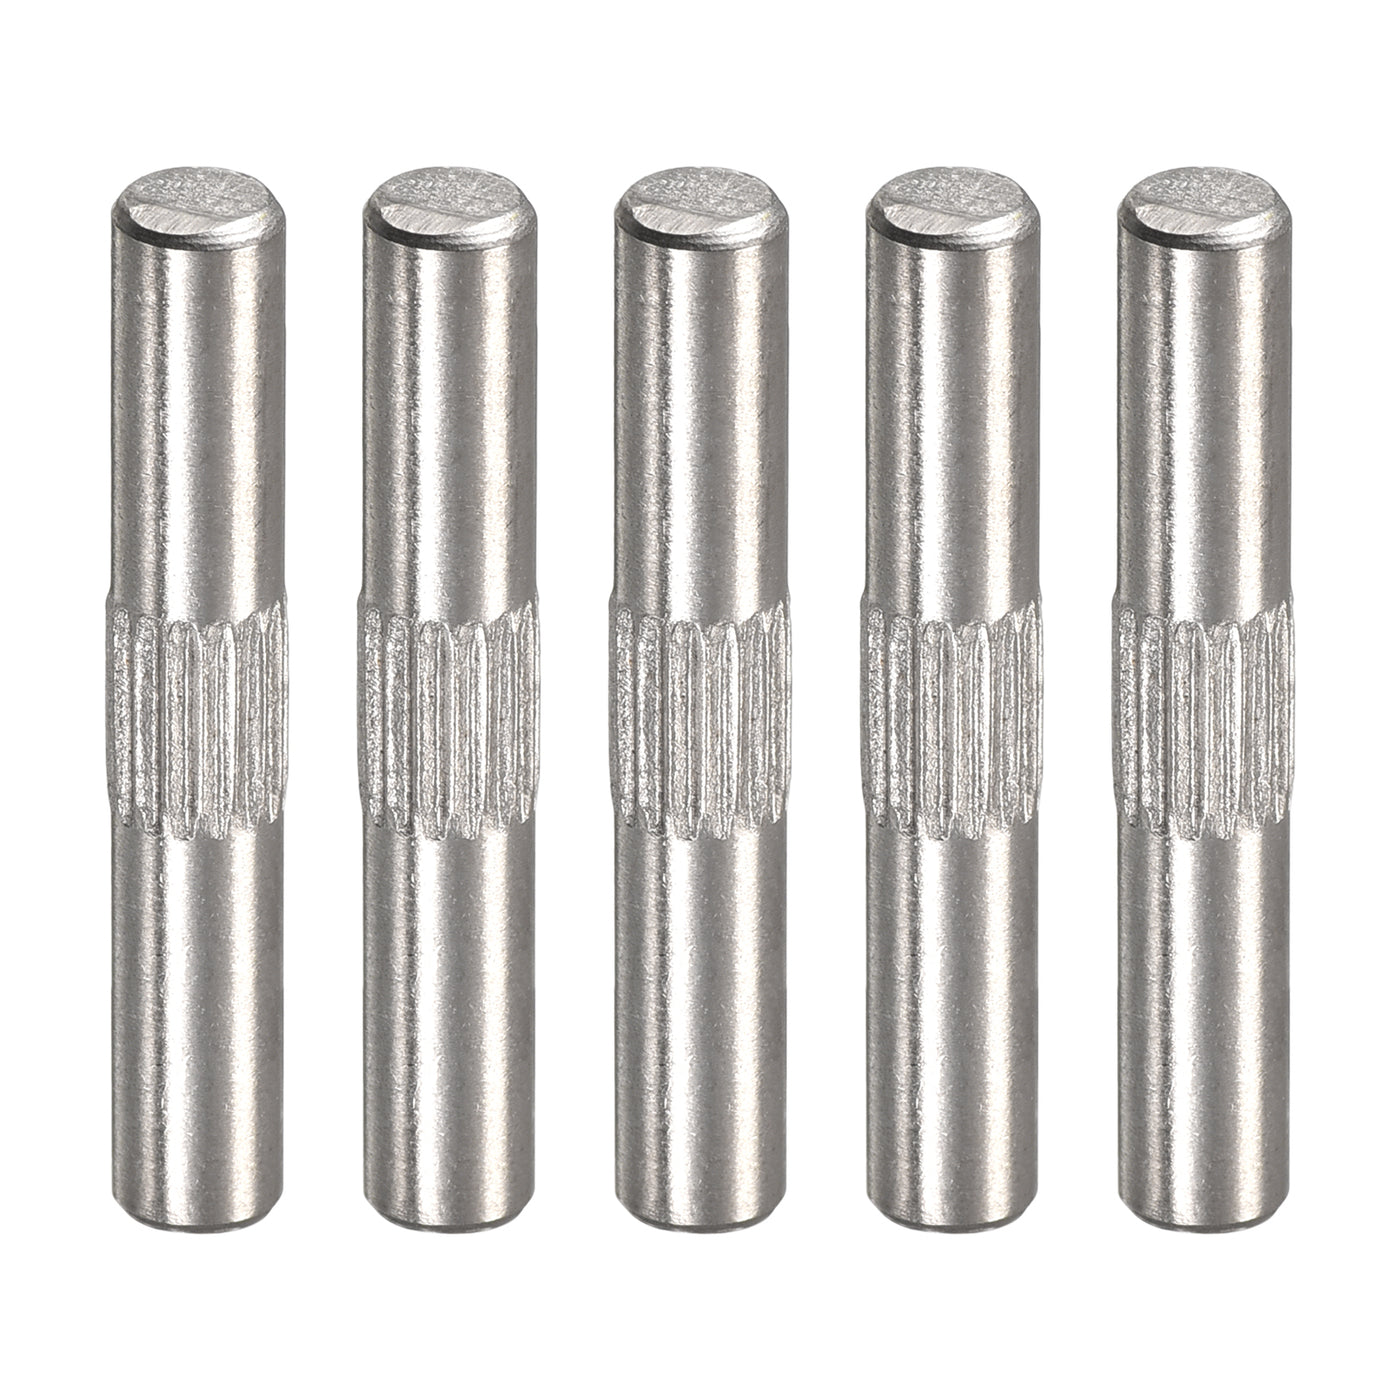 uxcell Uxcell 4x25mm 304 Stainless Steel Dowel Pins, 5Pcs Center Knurled Chamfered End Pin